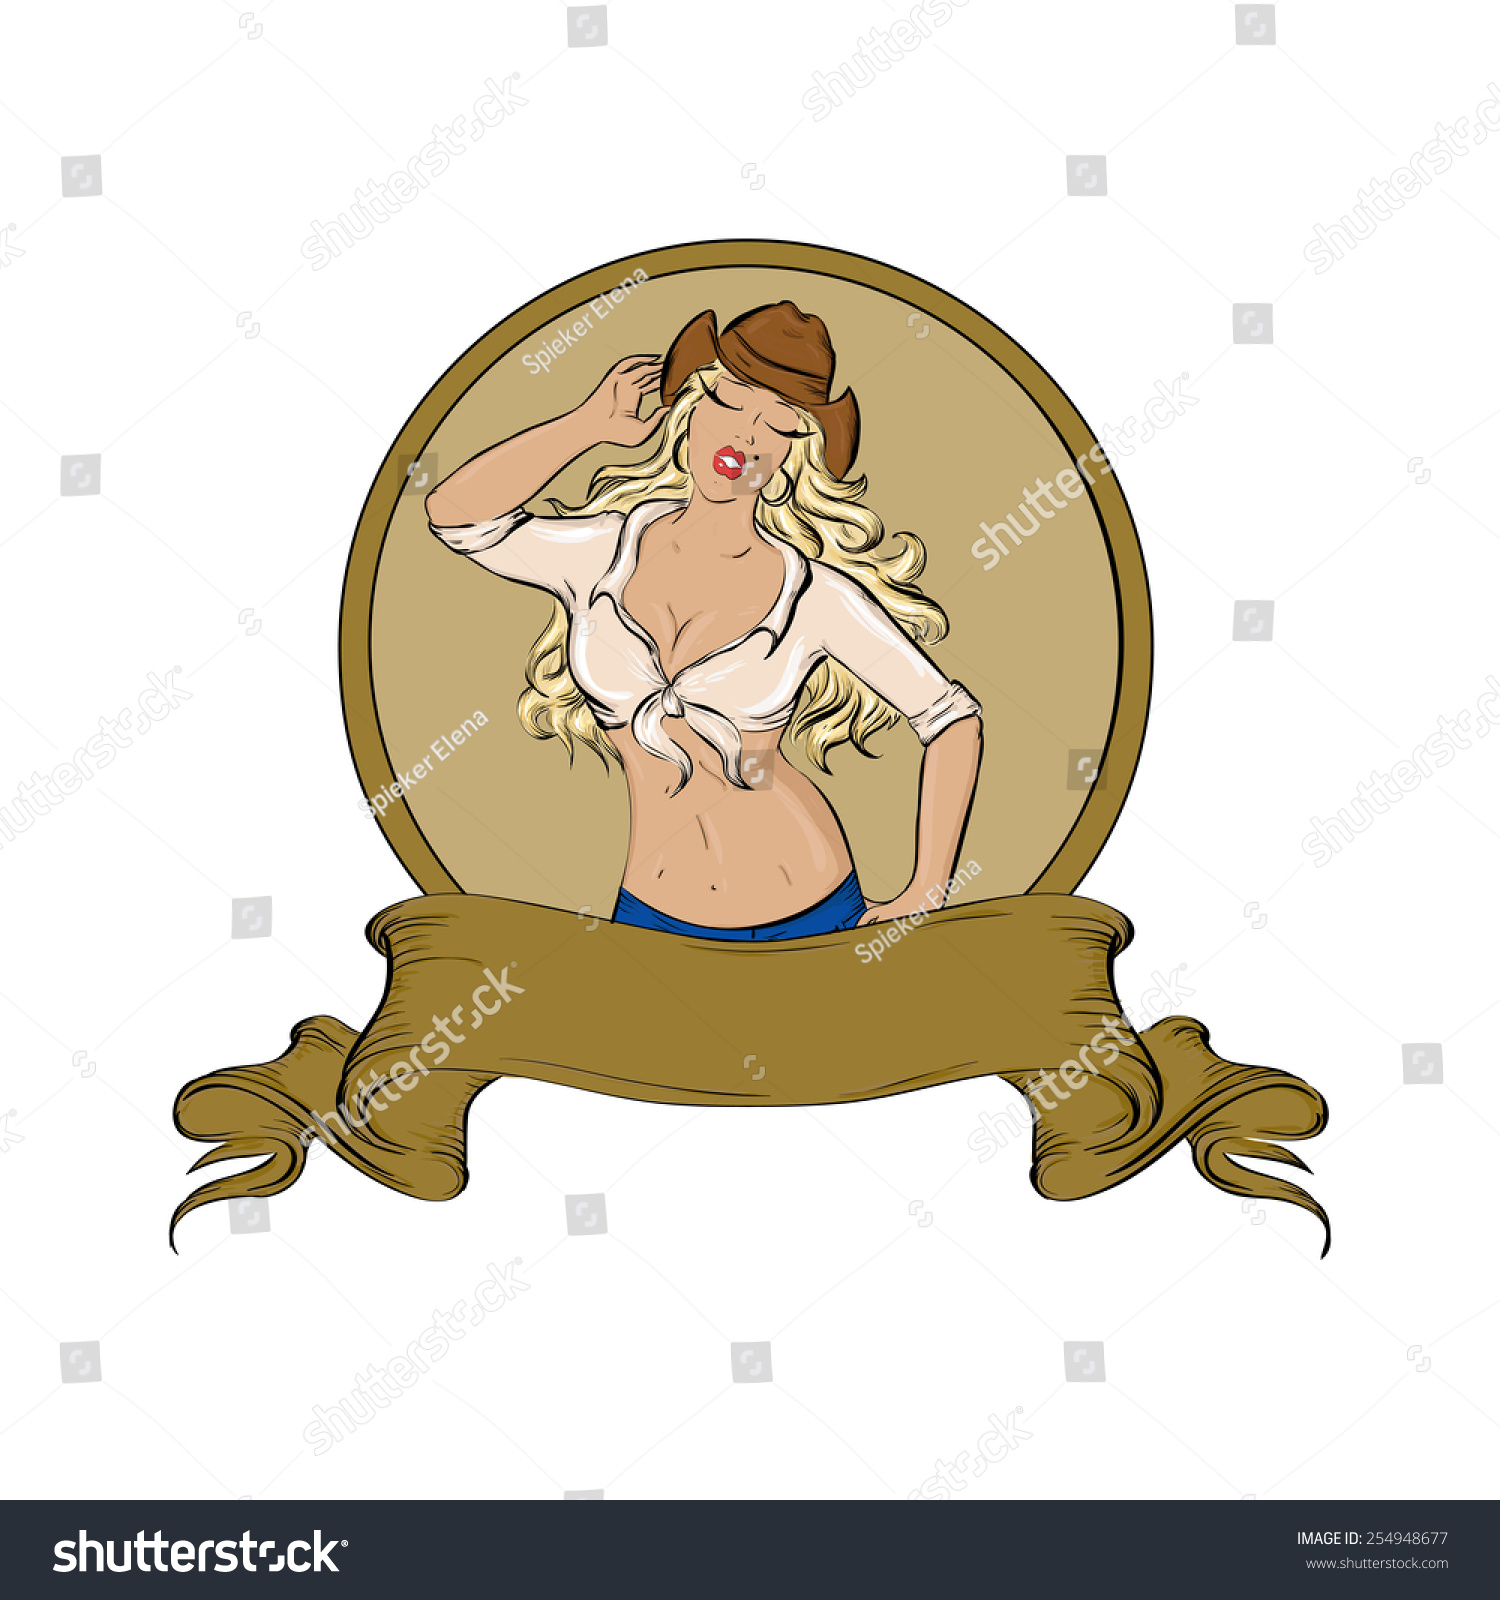 Sexy Cowgirl Vector Illustration Ribbon Banner Stock Vector Royalty Free Shutterstock